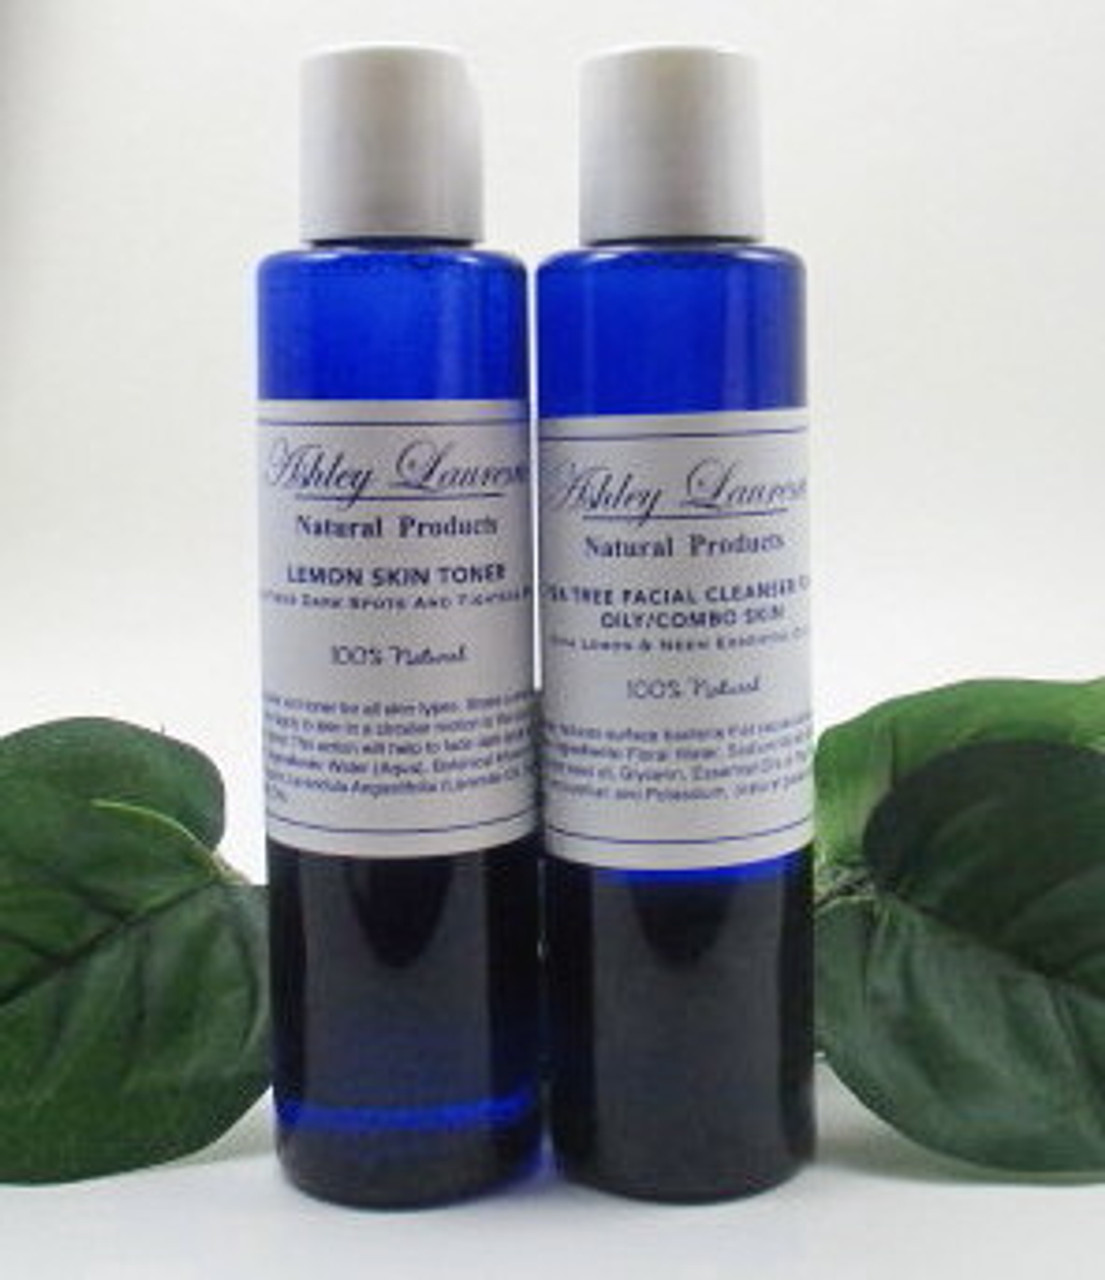 Tea Tree Cleanser shown on the right.